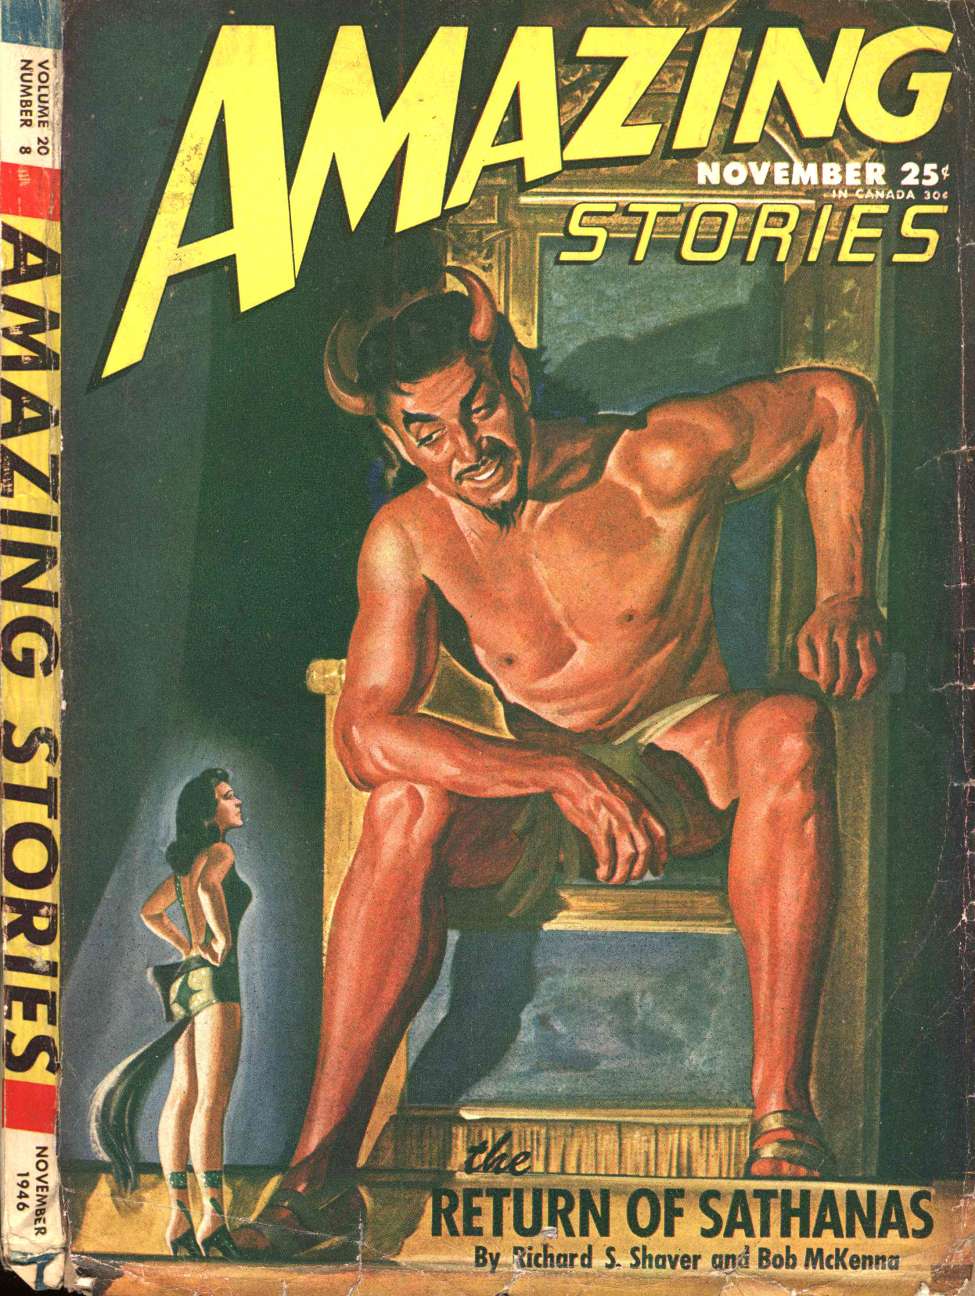 Comic Book Cover For Amazing Stories v20 8 - The Return of Sathanas - Richard S. Shaver